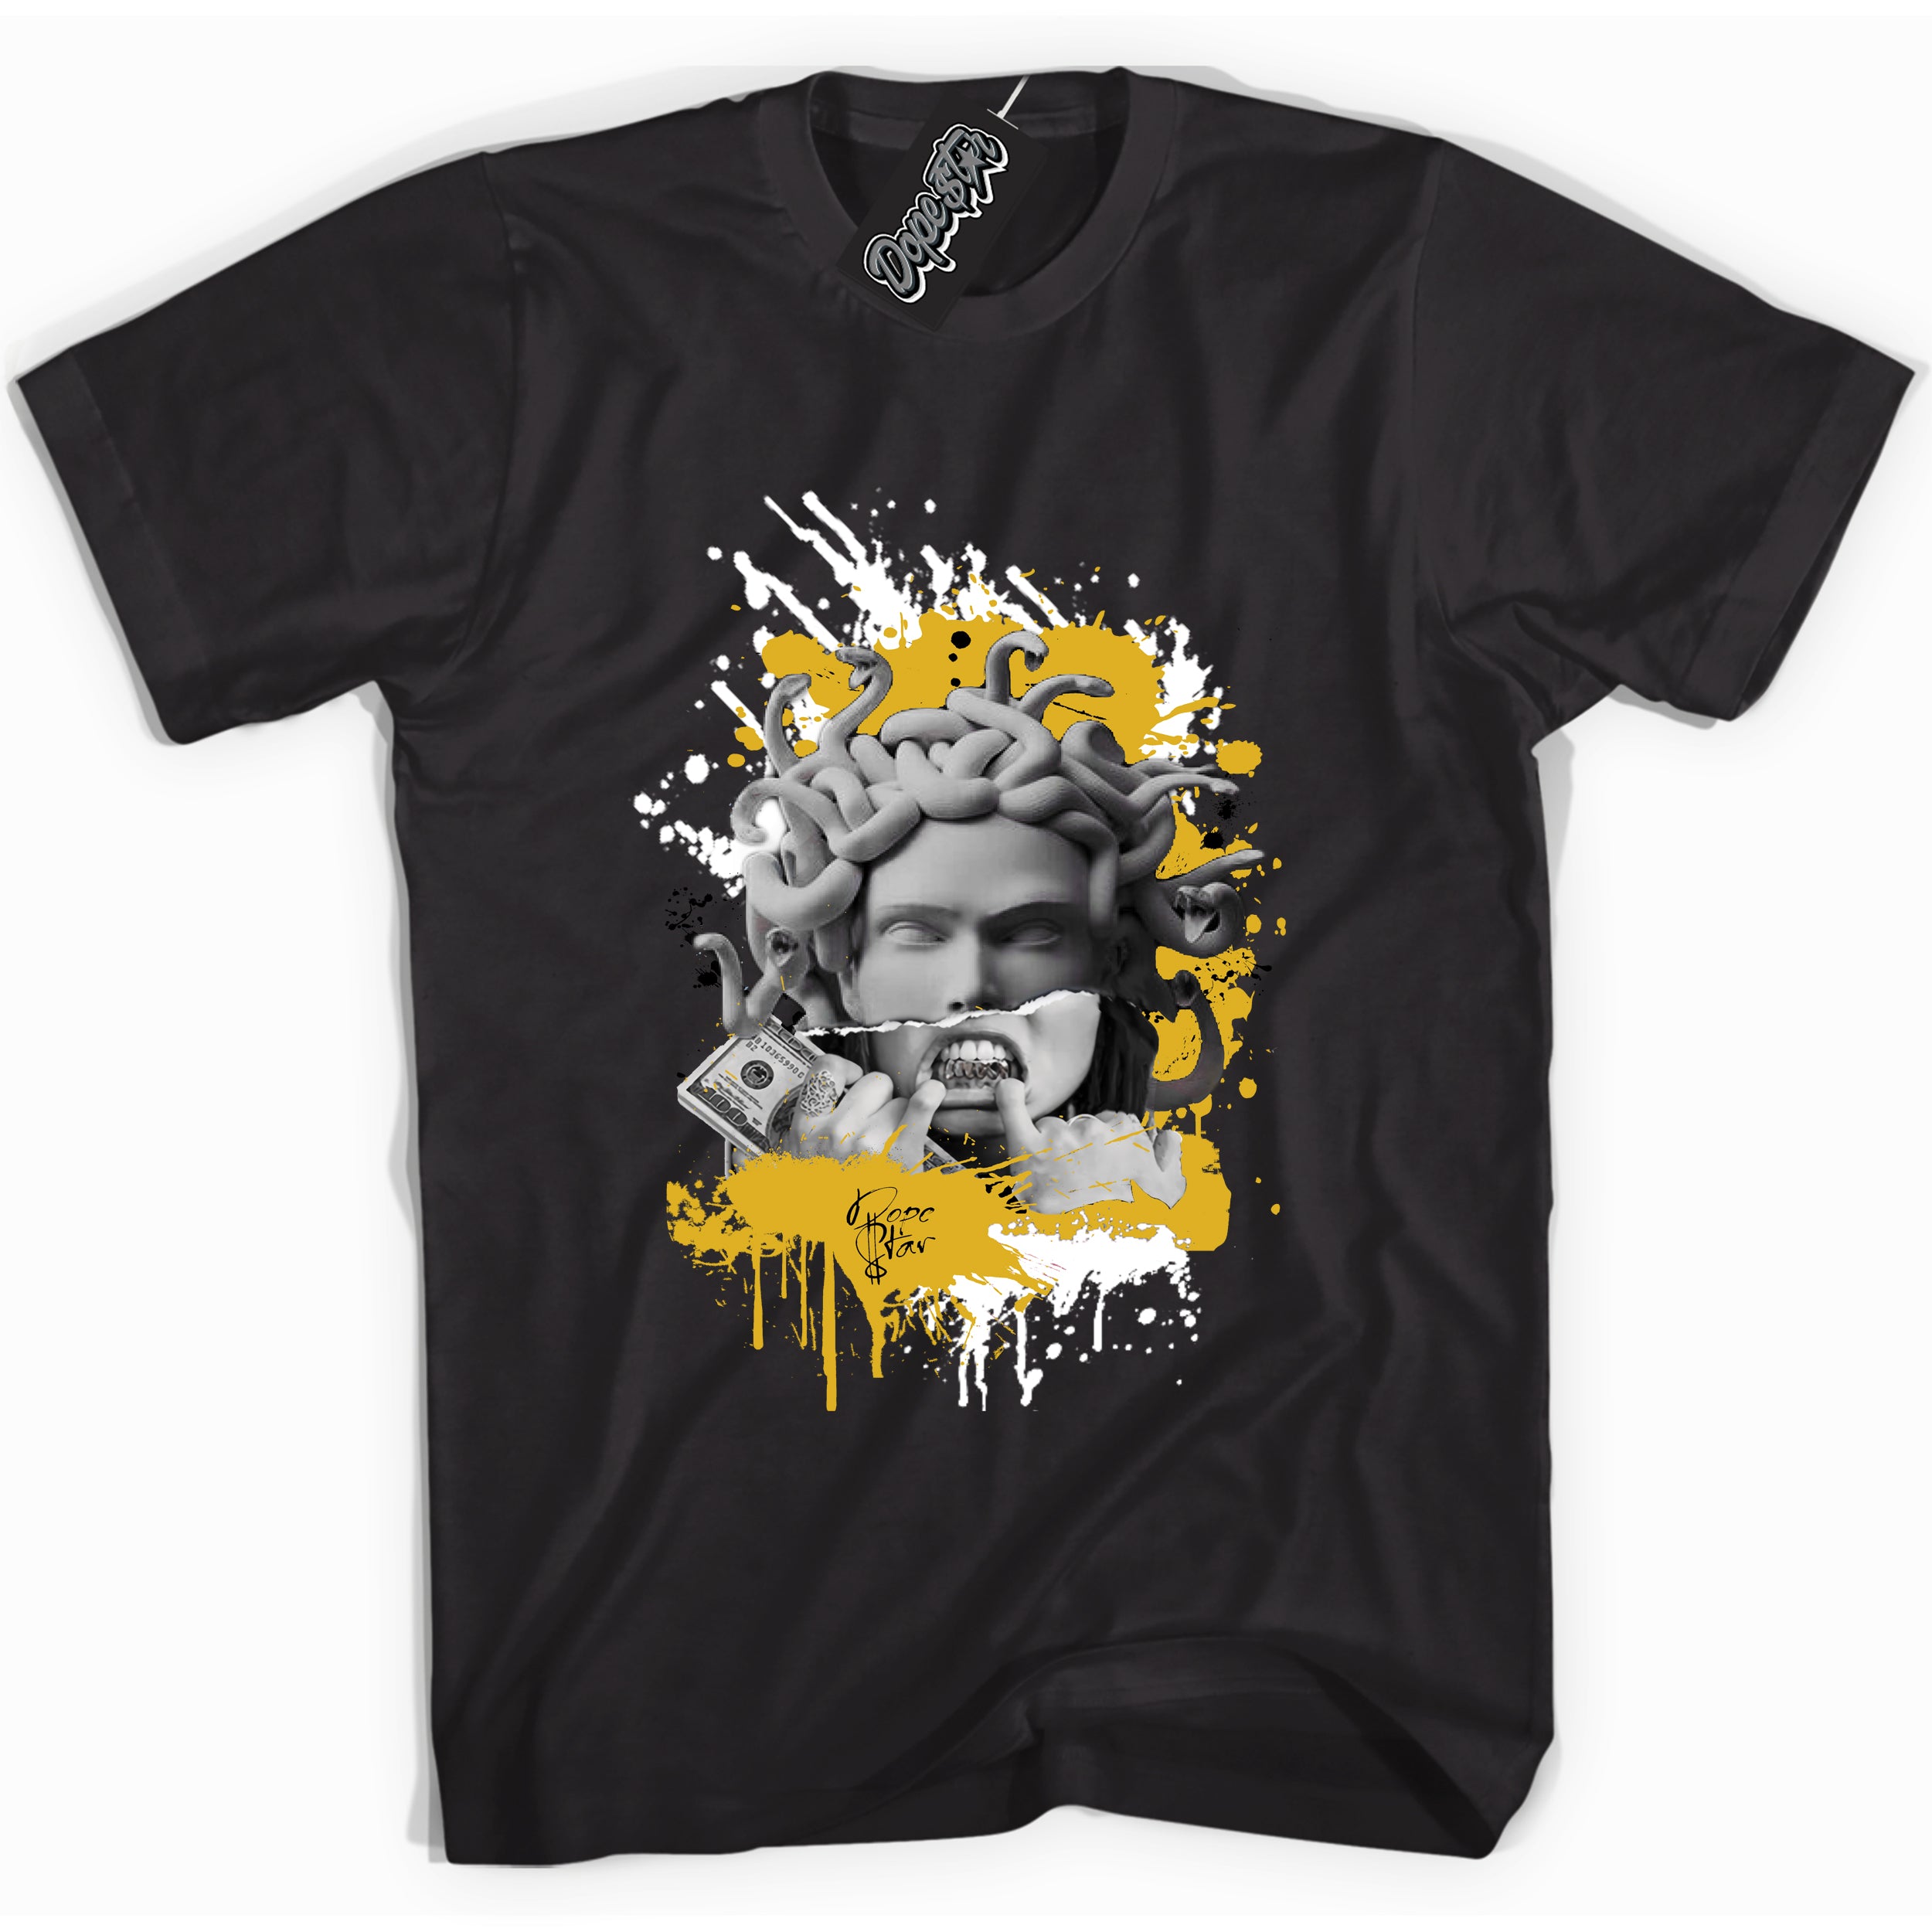 Cool Black Shirt with “ Medusa ” design that perfectly matches Yellow Ochre 6s Sneakers.